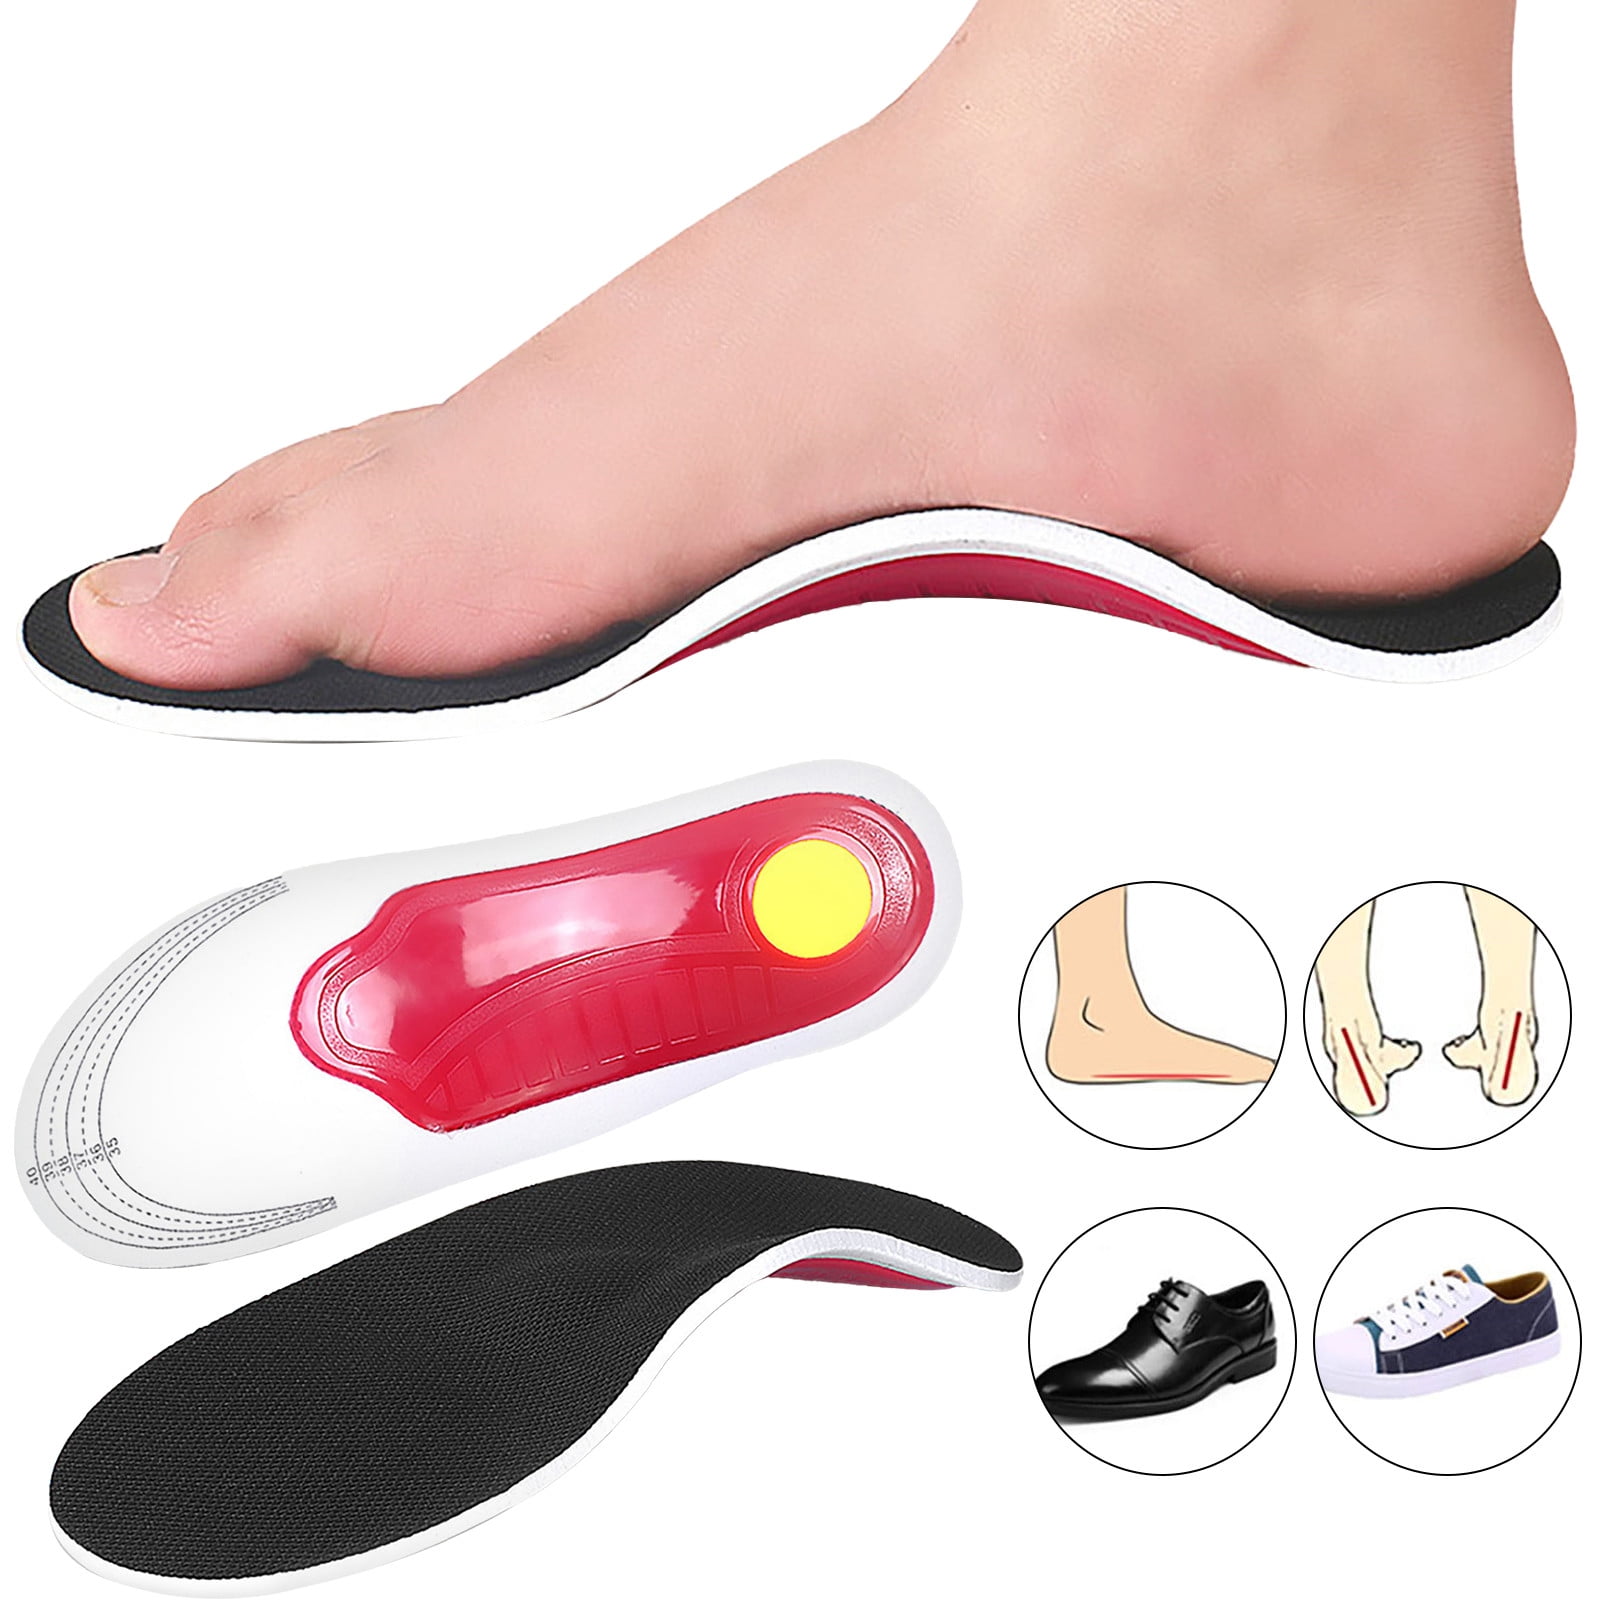 Orthotic Insoles Arch Support Inserts Fallen Arches Flat Feet Heel Pain H 